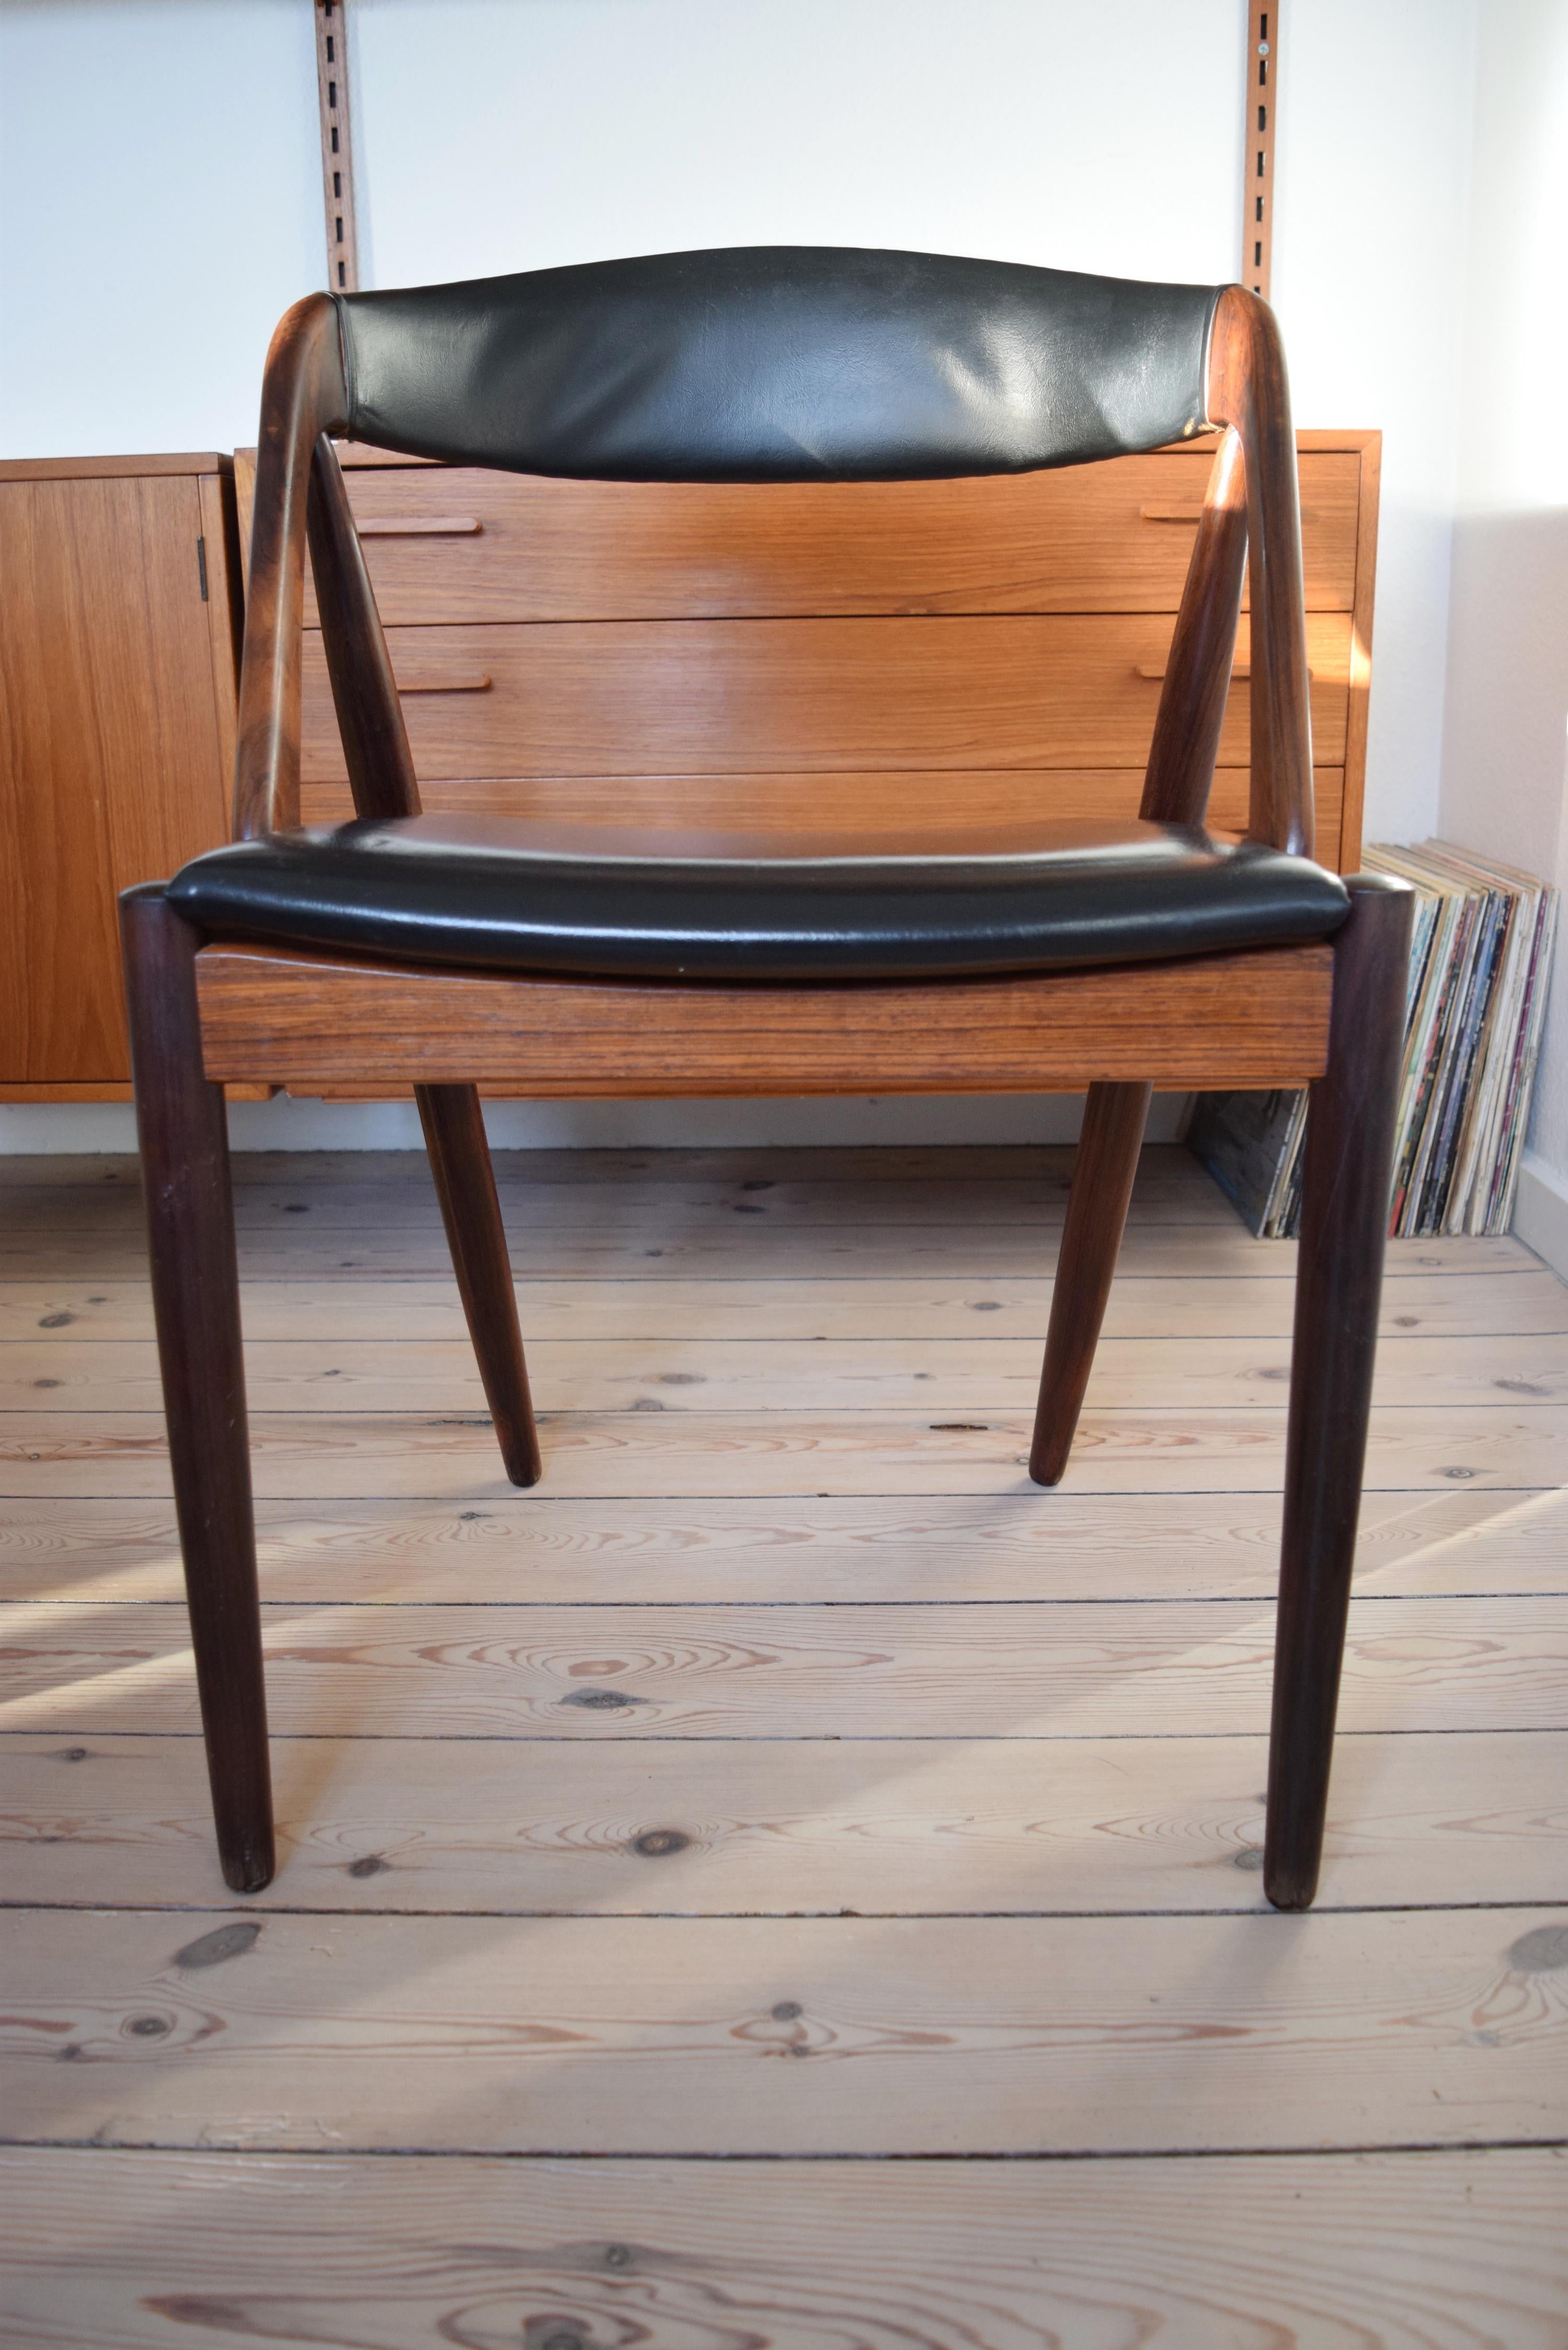 Dining chair by Kai Kristiansen for Schou Møbelfabrik, Denmark. The frame is made of rosewood and the seat and backrest is covered in the original black skai. This model features a deep curved backrest for extra comfort.